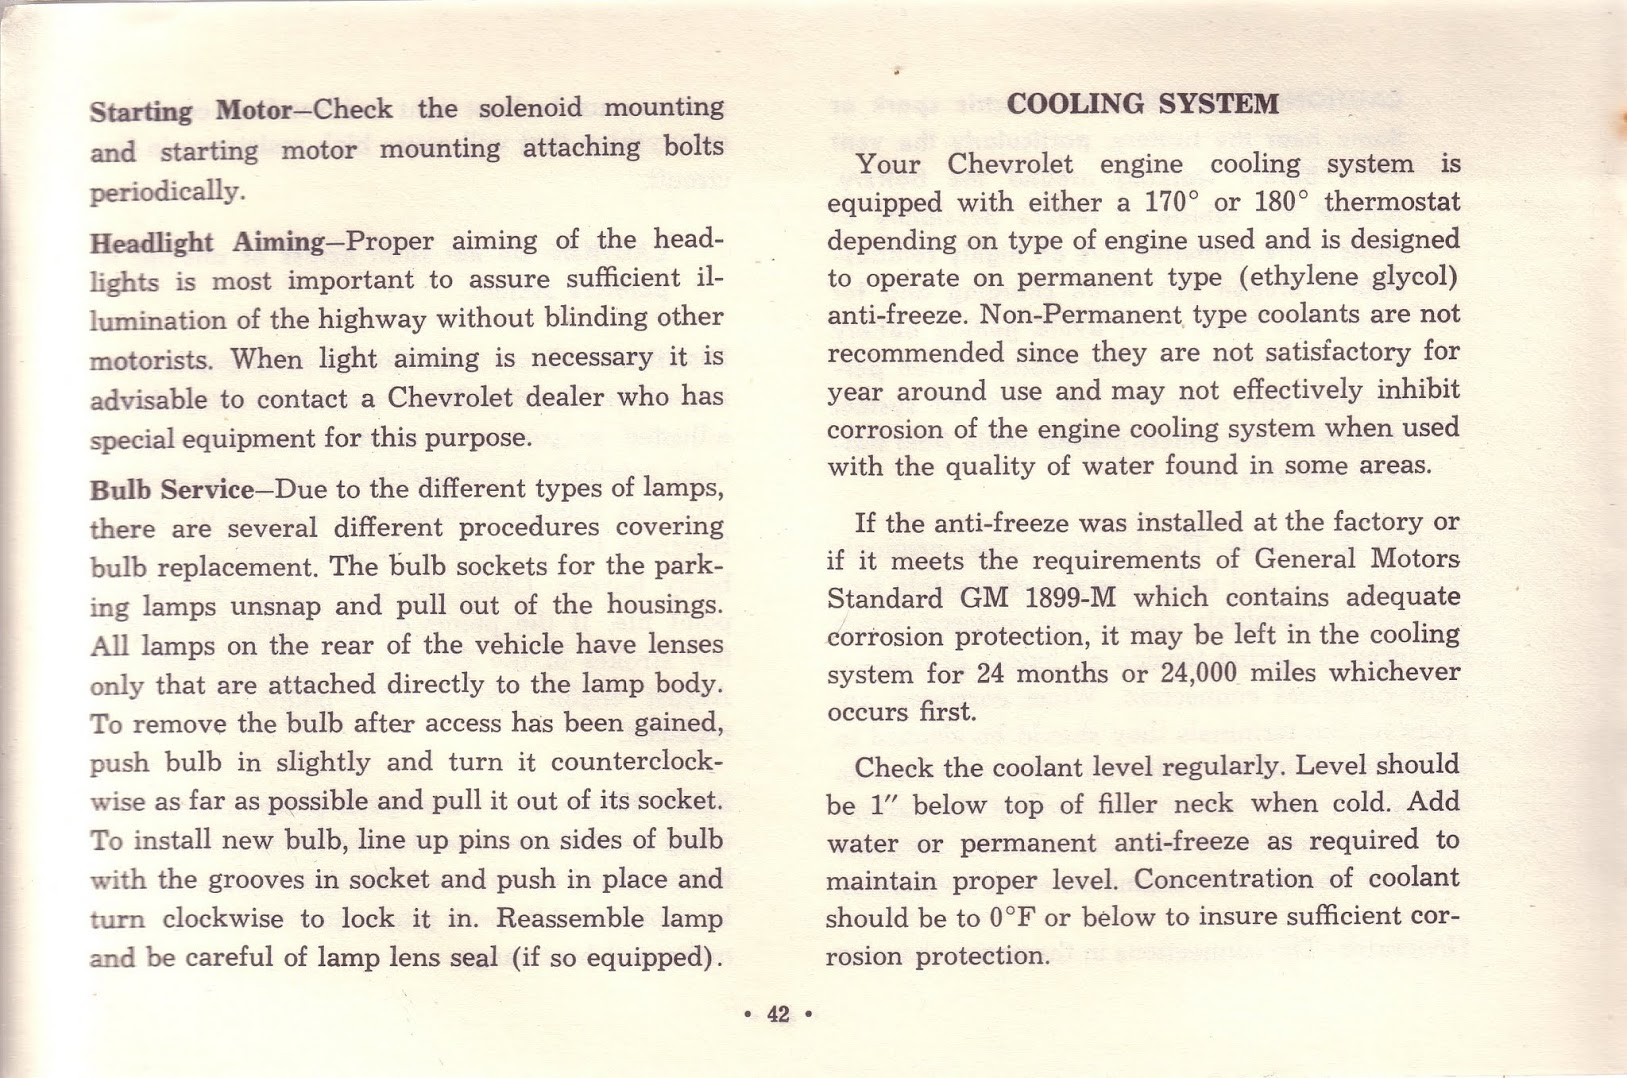 1963_Chevrolet_Truck_Owners_Guide-42